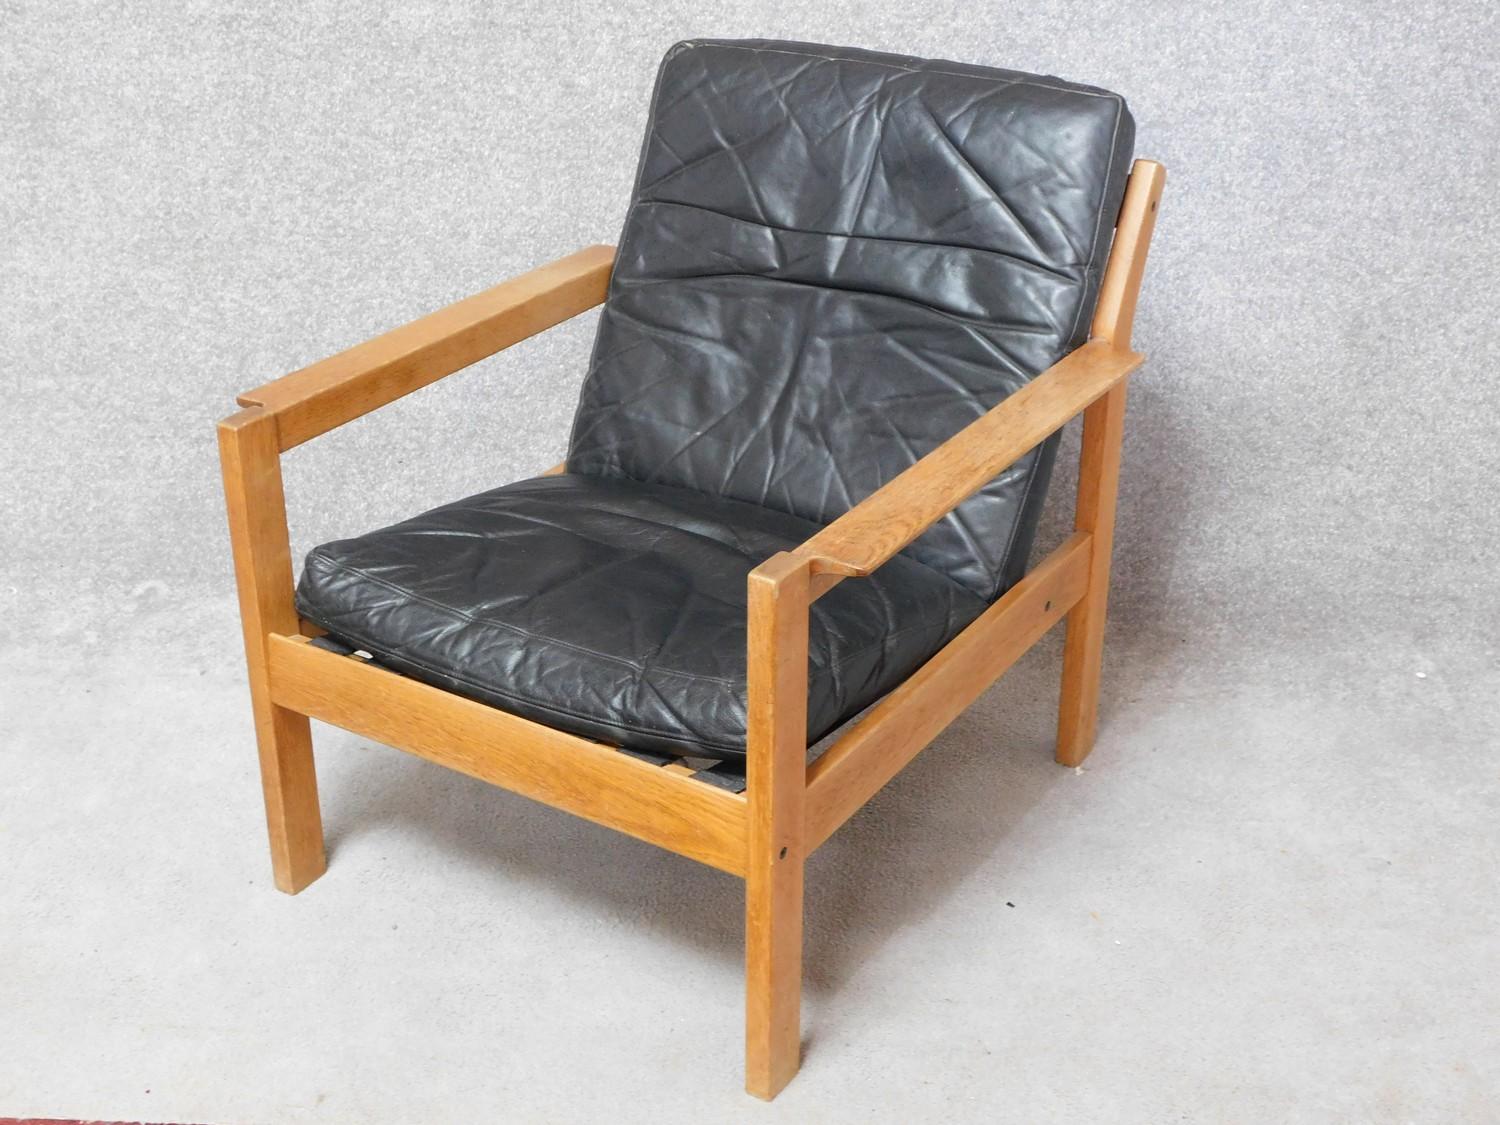 A mid century vintage teak framed armchair with black leather seat and back cushions. 77x70cm - Image 3 of 3